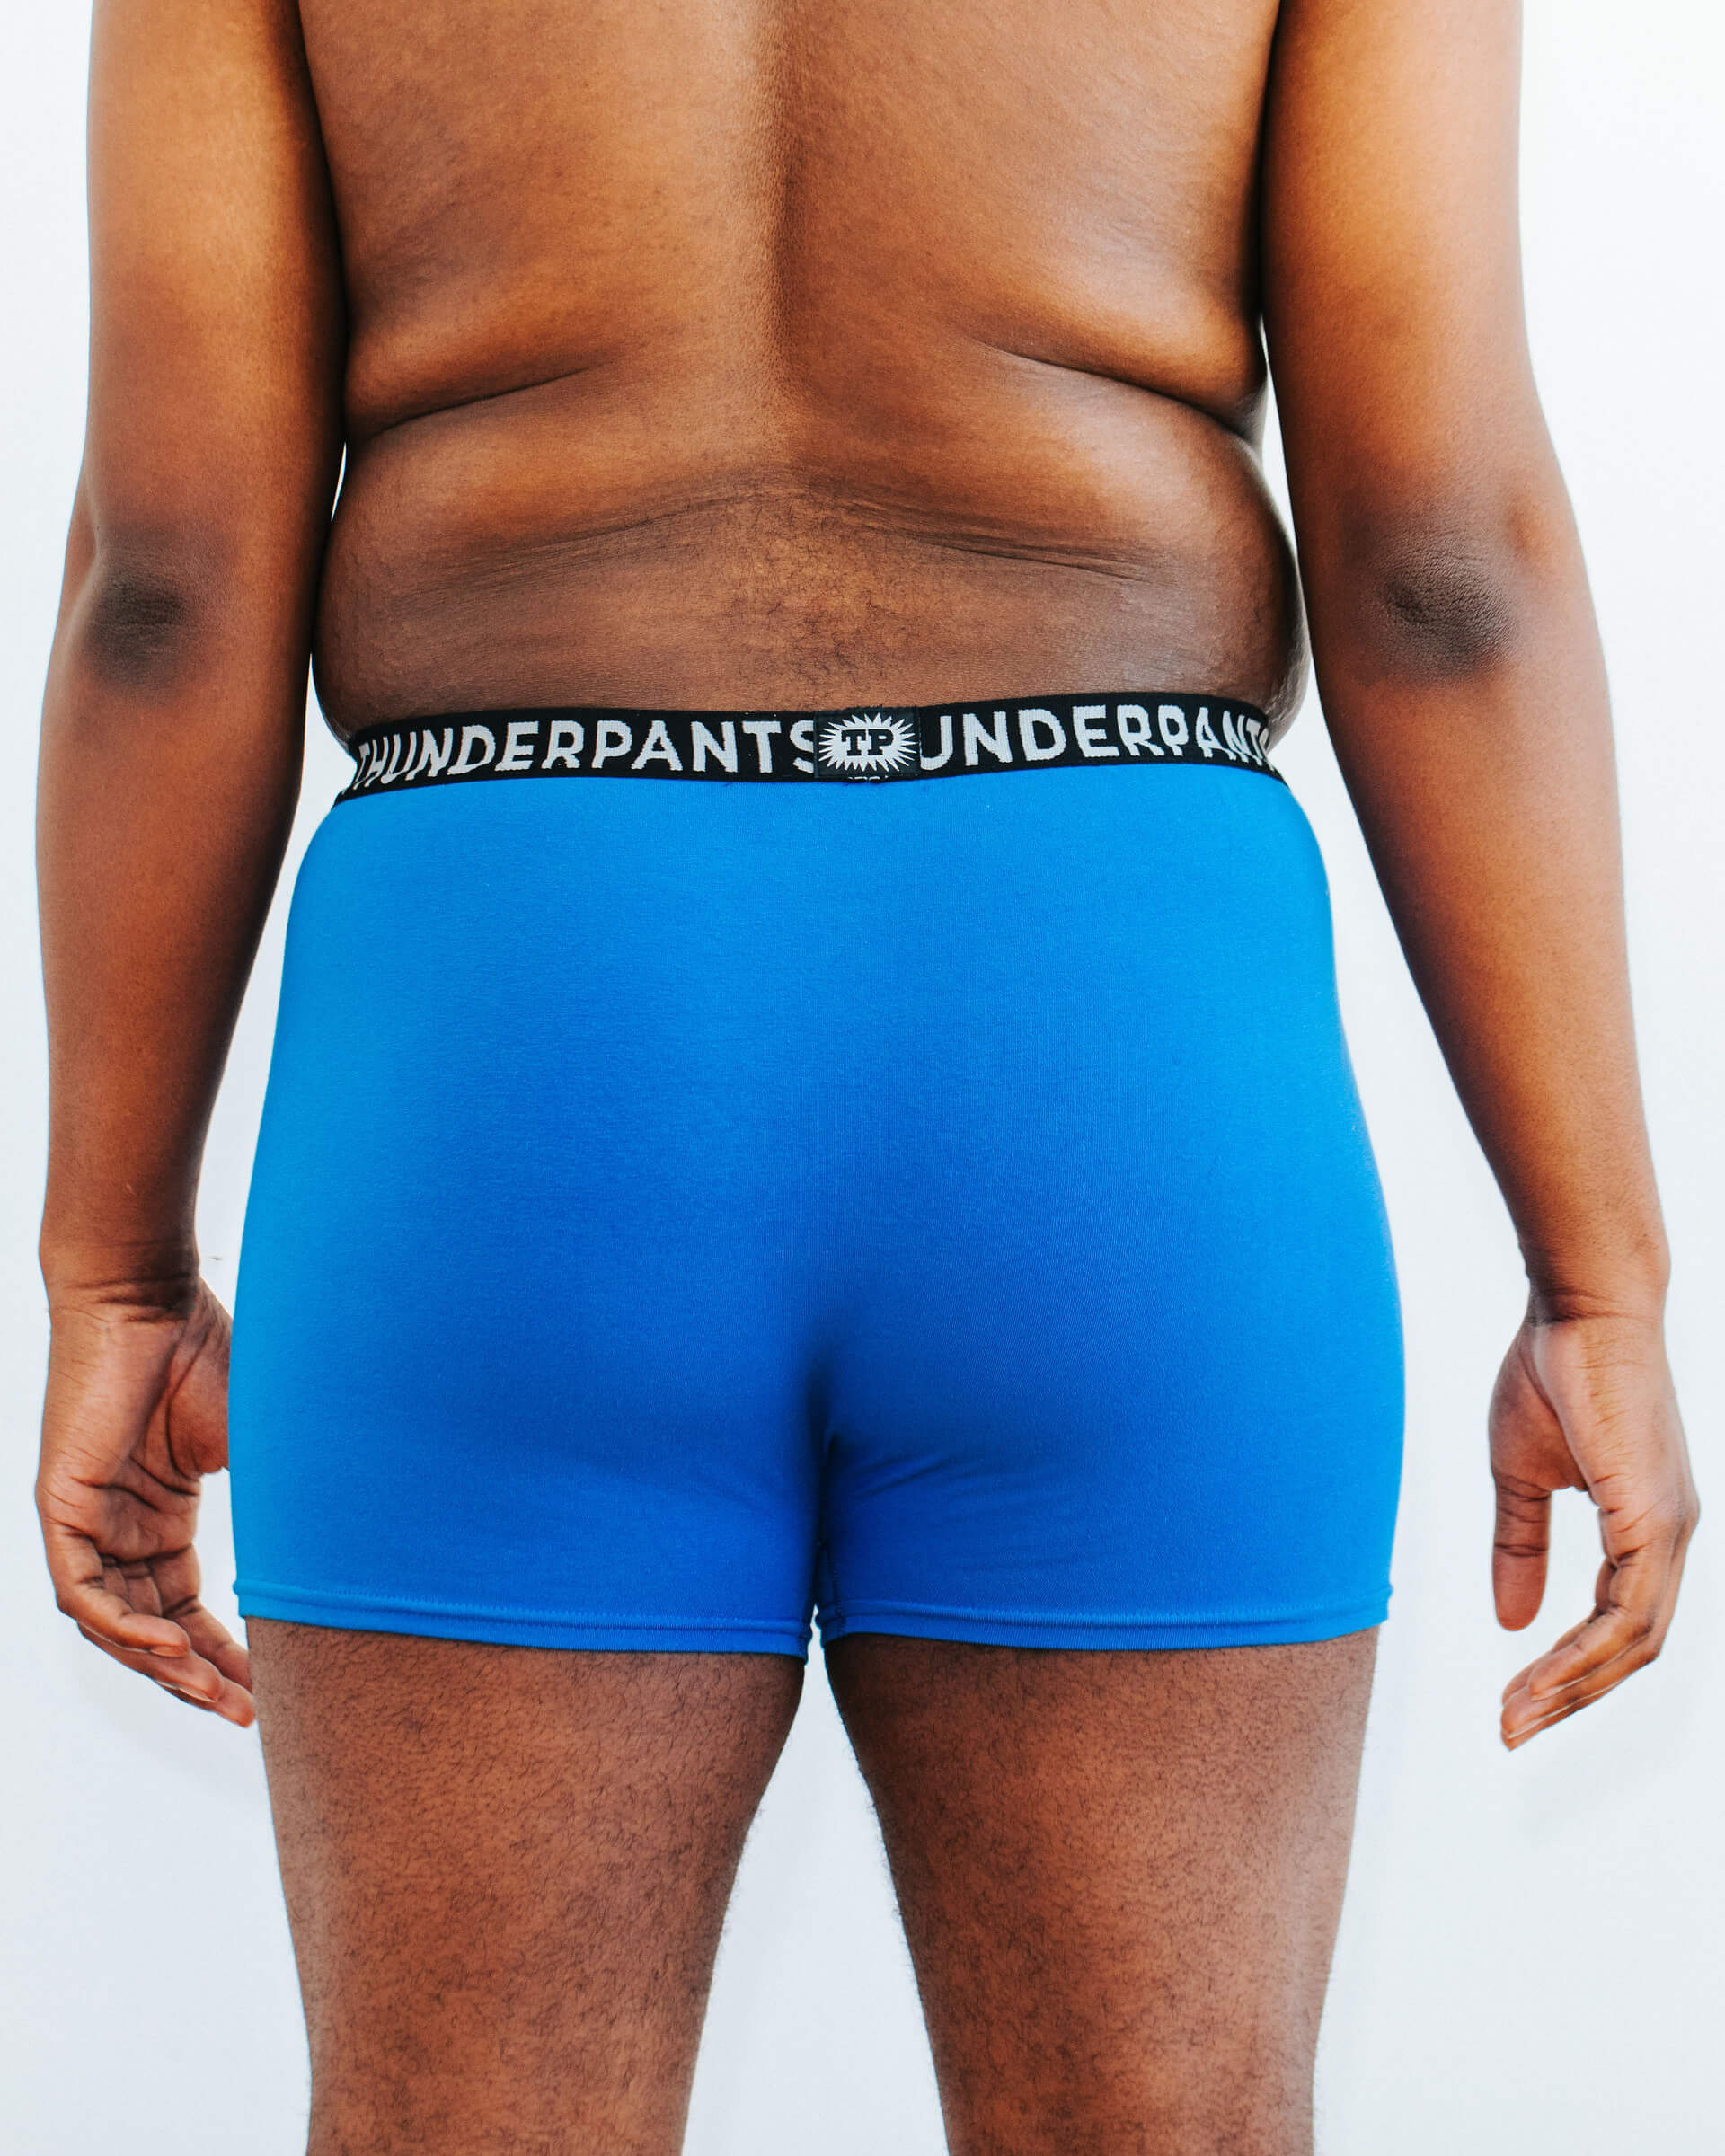 Back photo showing Thunderpants Organic Cotton Boxer Brief style underwear in Blueberry Blue on a model.